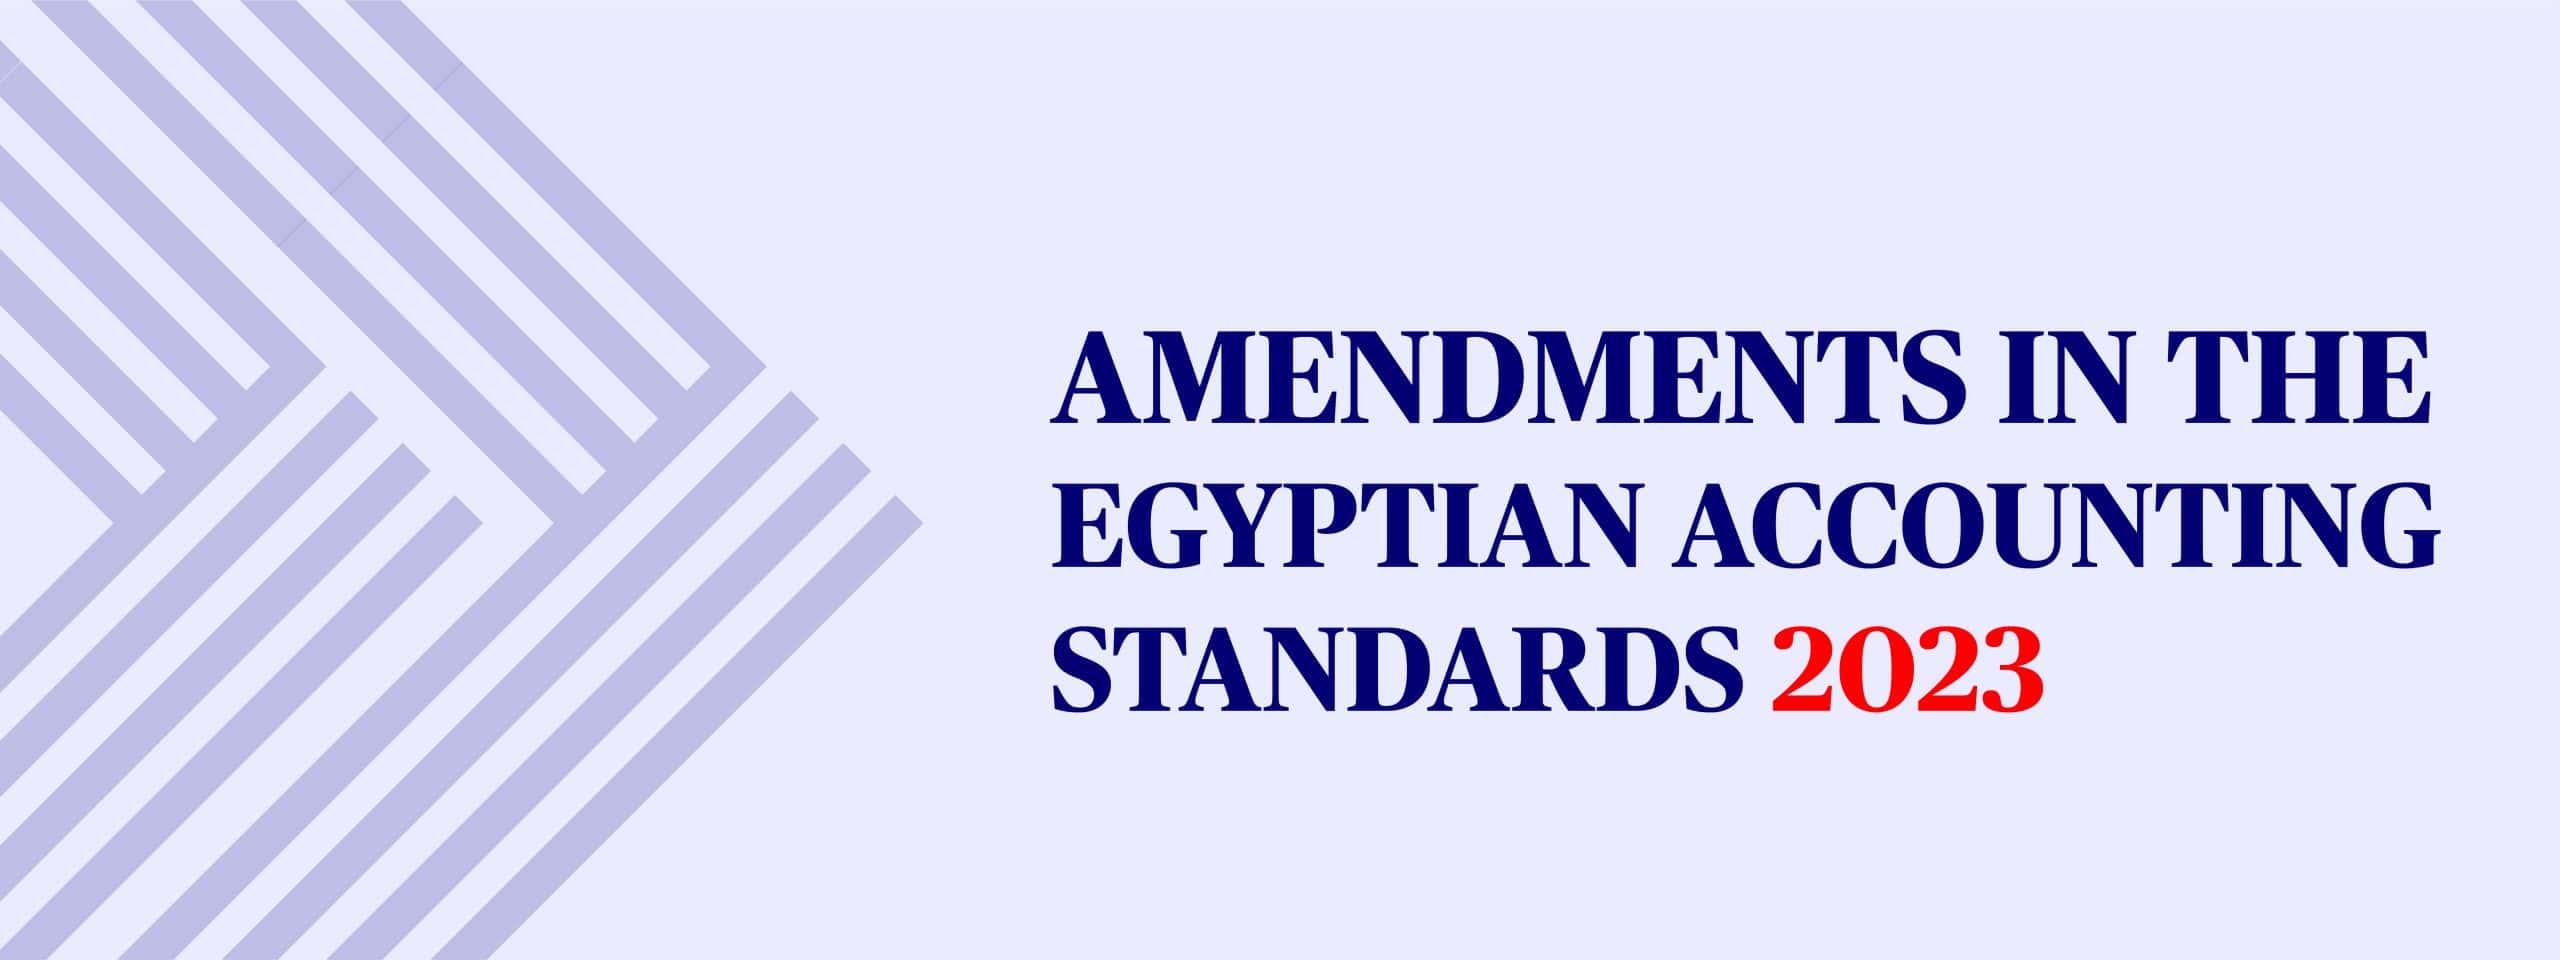 AMENDMENTS IN THE EGYPTIAN ACCOUNTING STANDARDS 2023